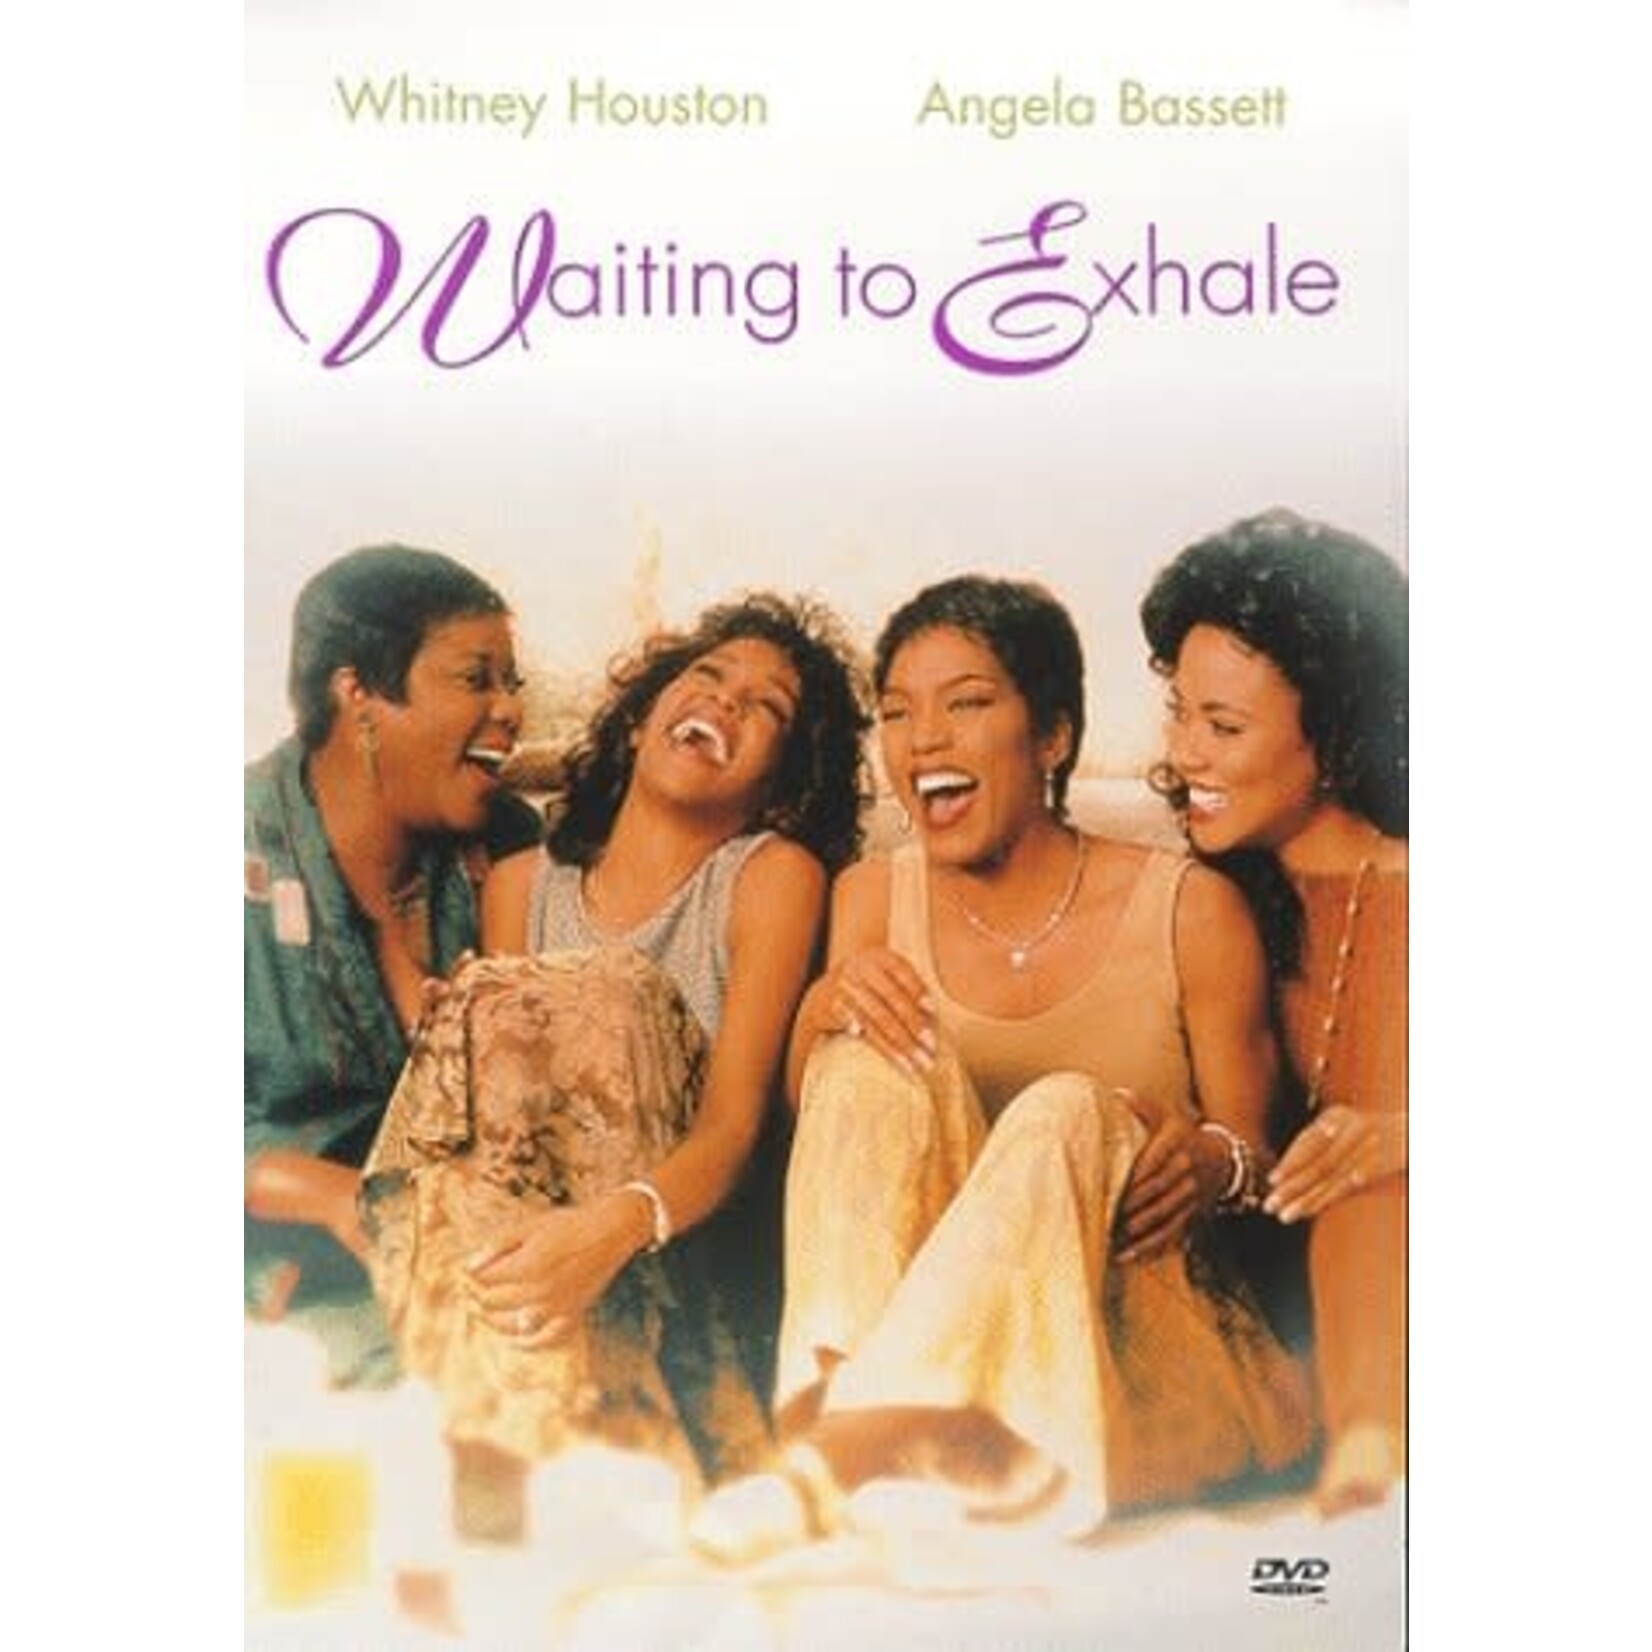 Waiting To Exhale (1995) [USED DVD]